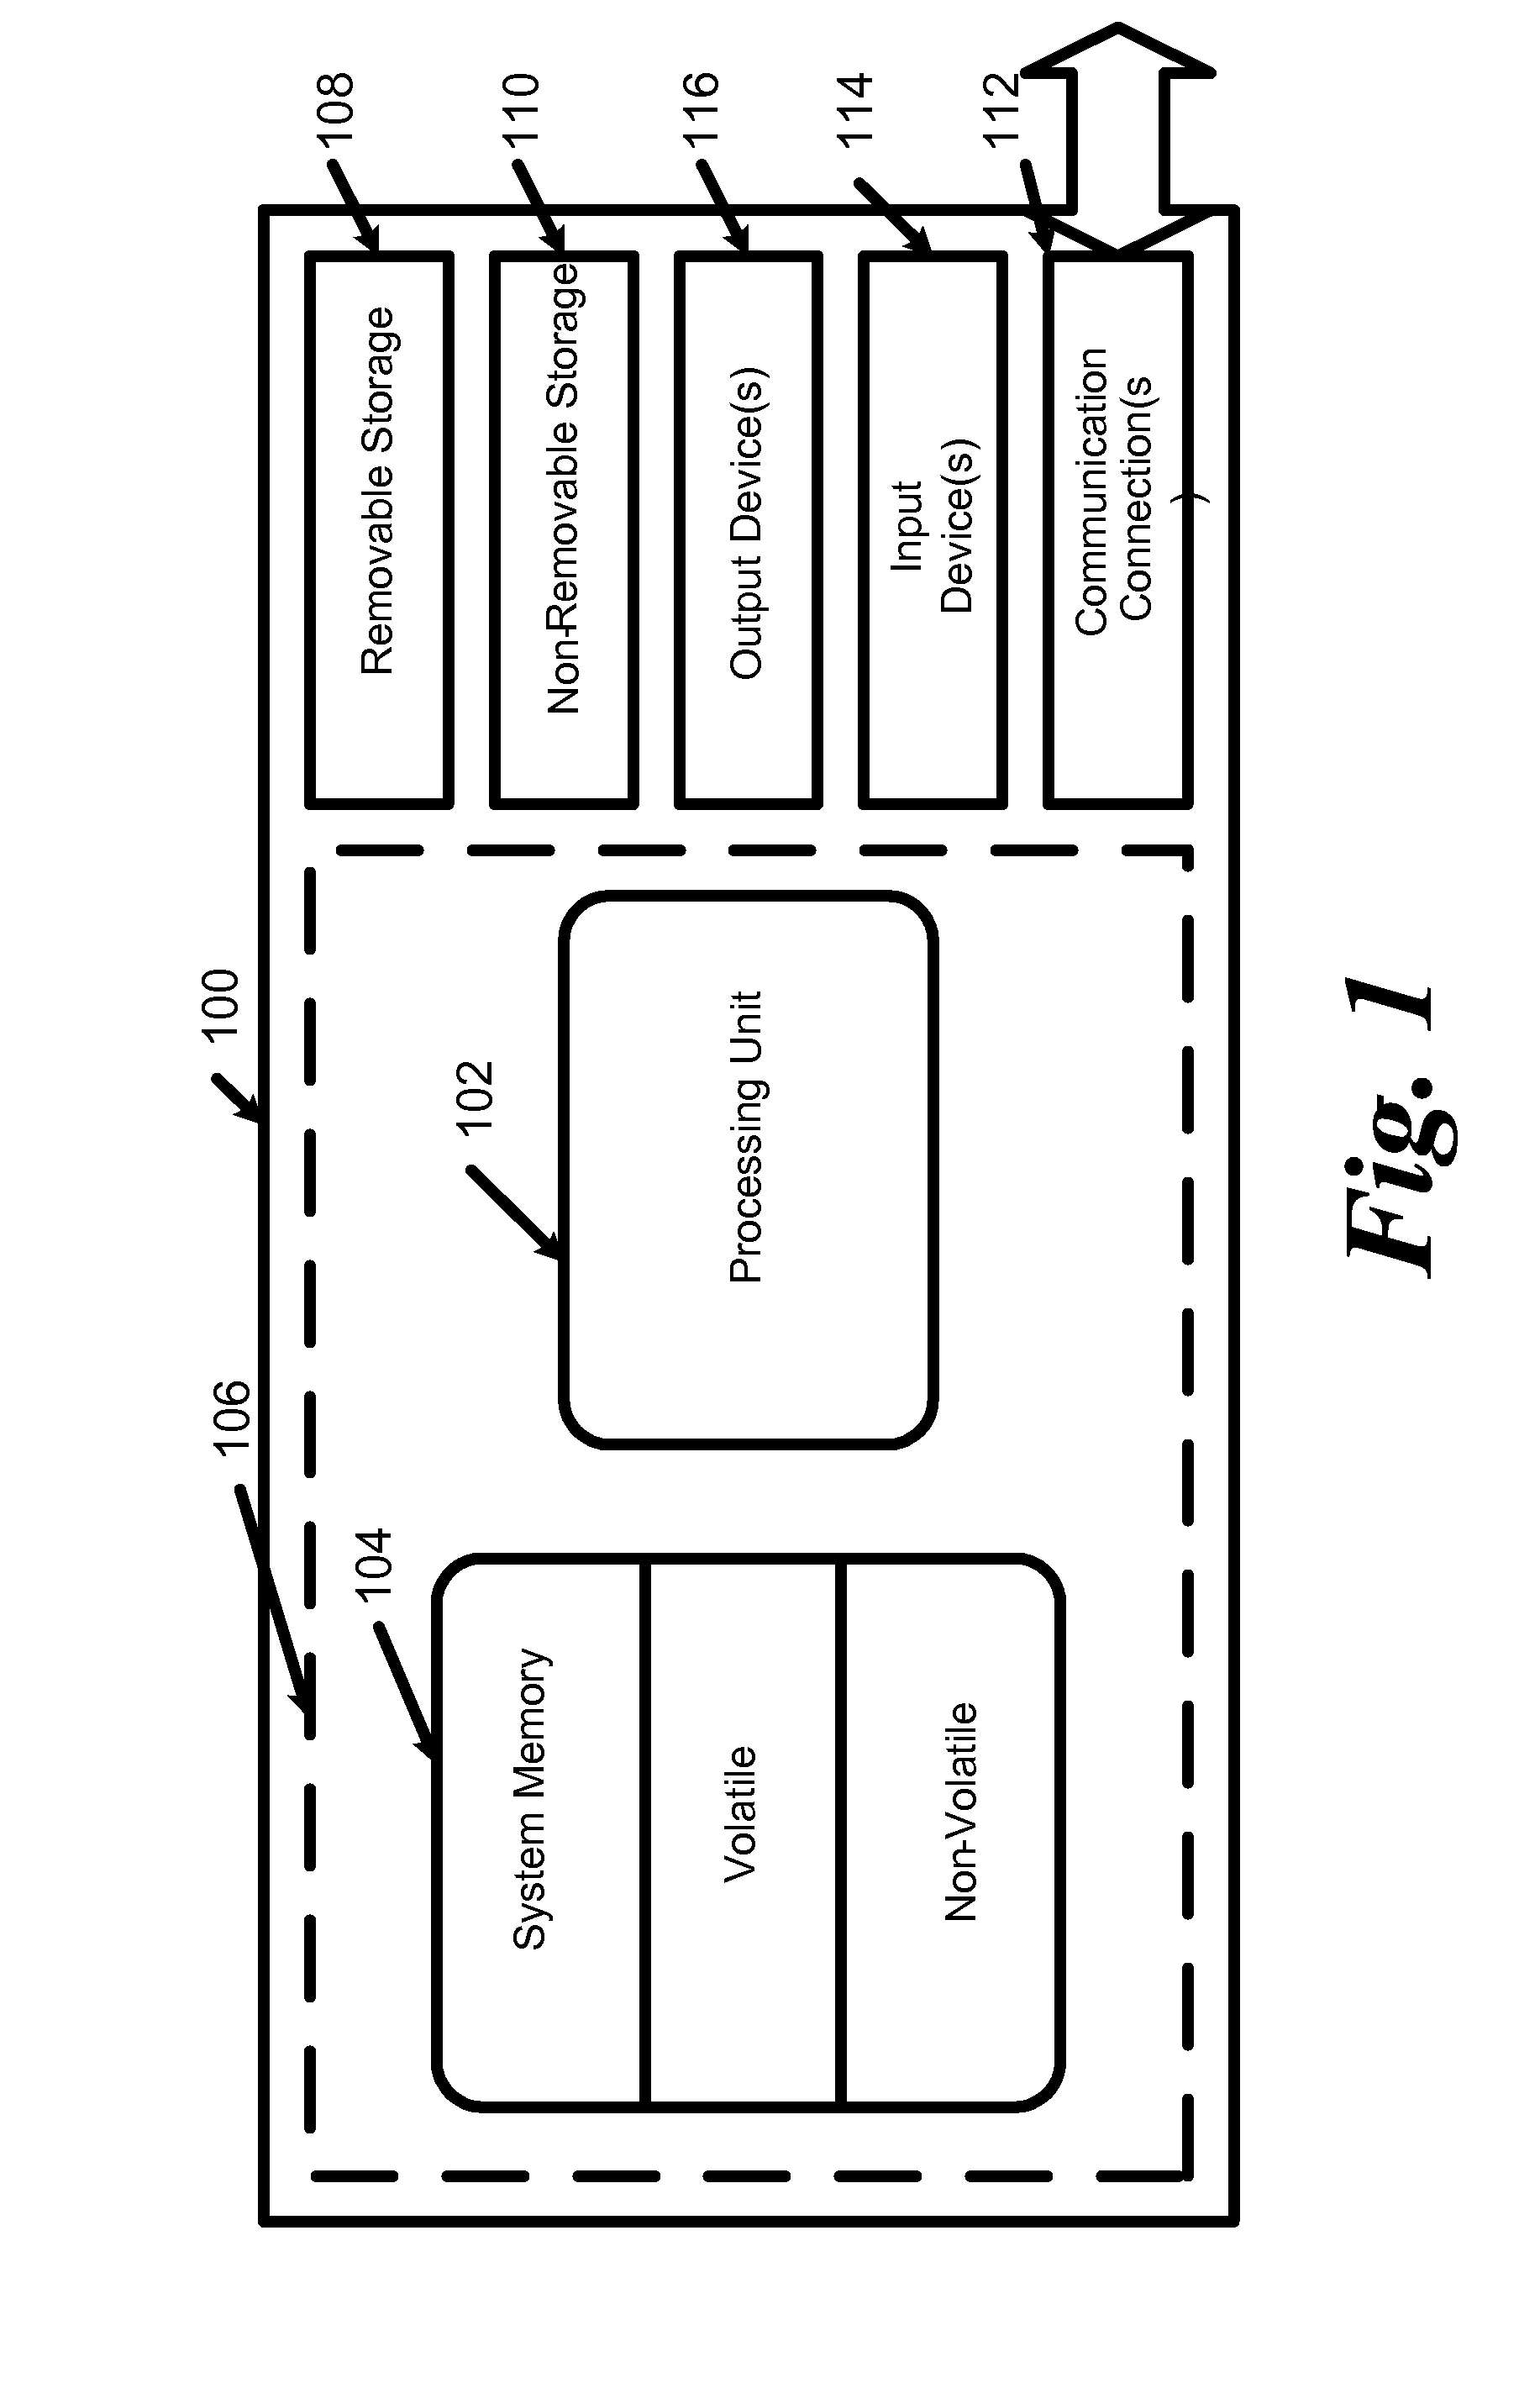 Tax-return preparation systems and methods